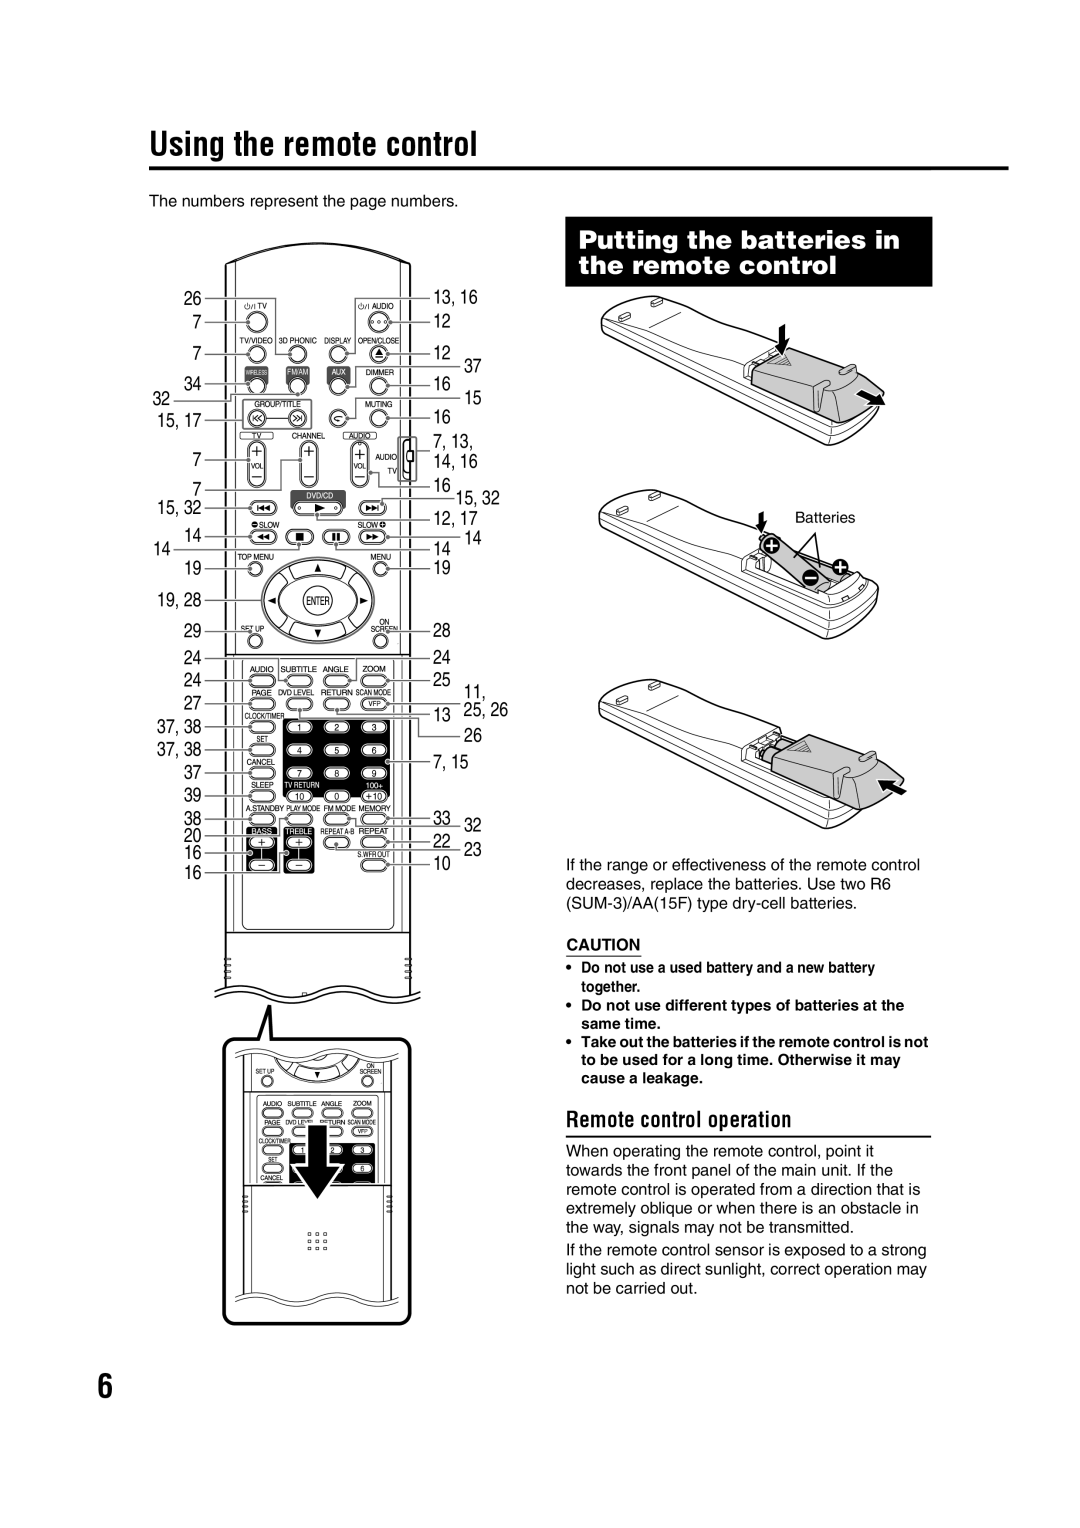 JVC GVT0144-005A manual Using the remote control, Putting the batteries in the remote control, Remote control operation 